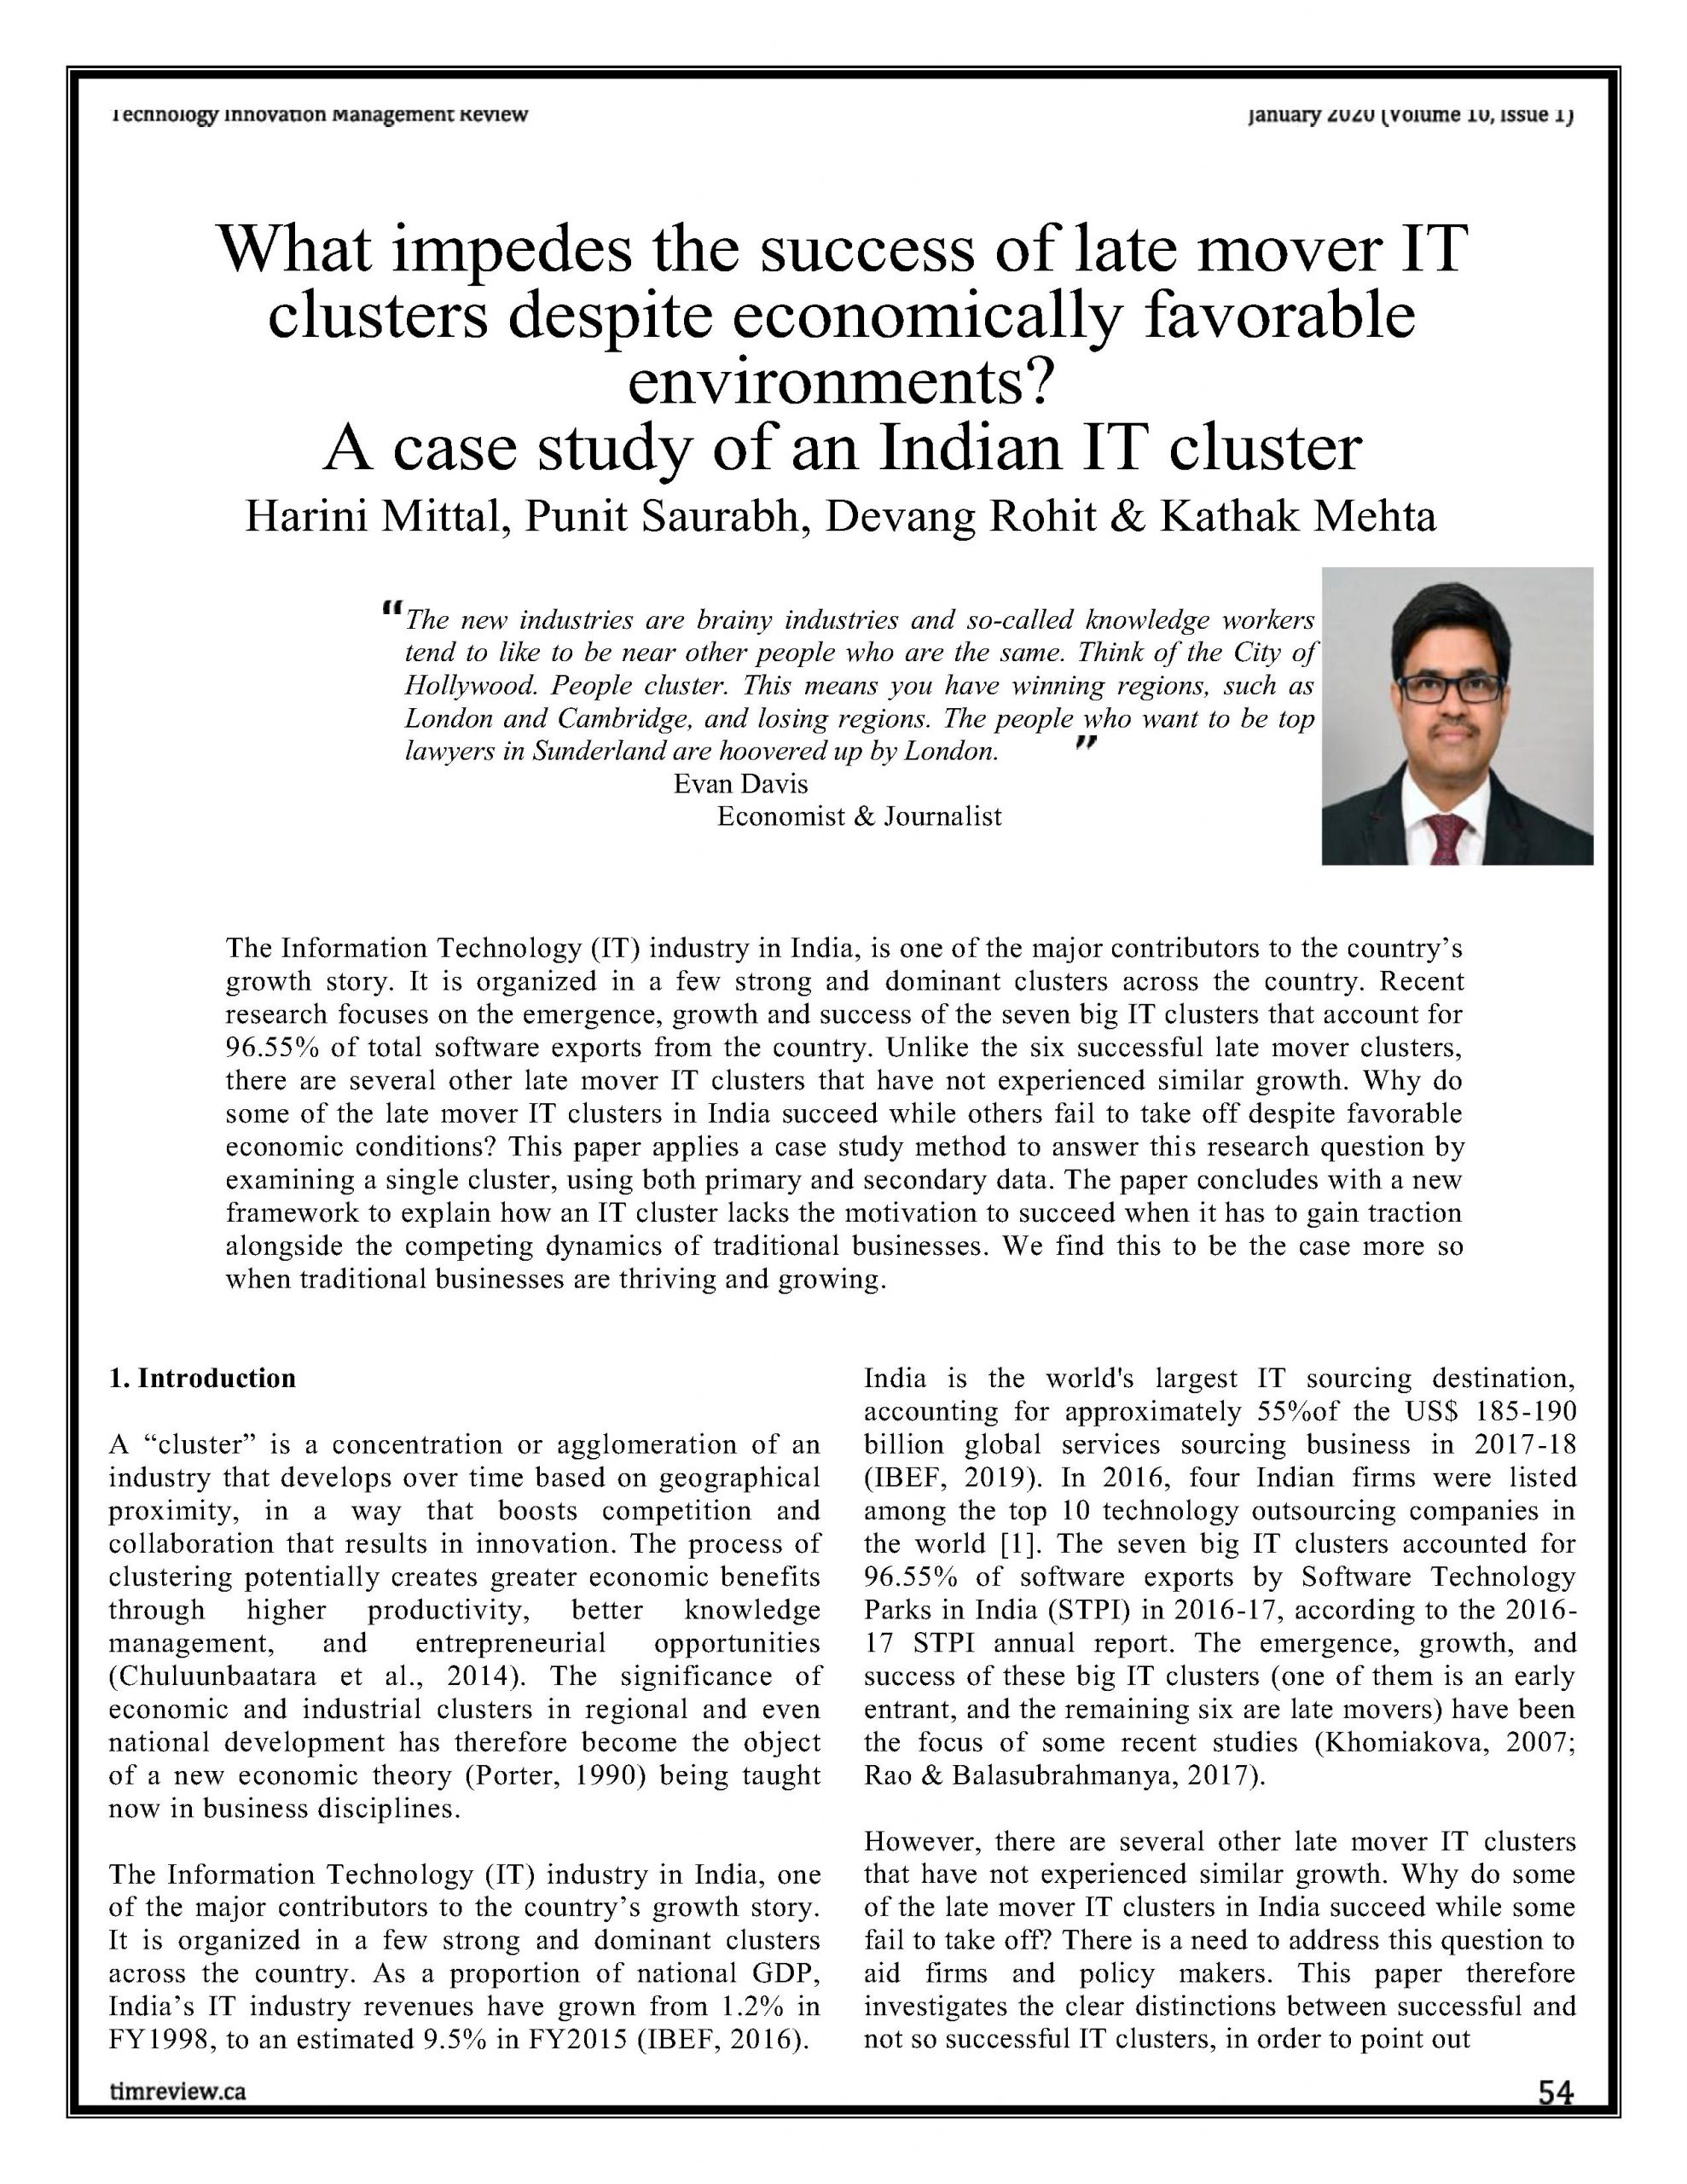 What impedes the success of late mover IT clusters despite economically favorable environments? A case study of an Indian IT cluster